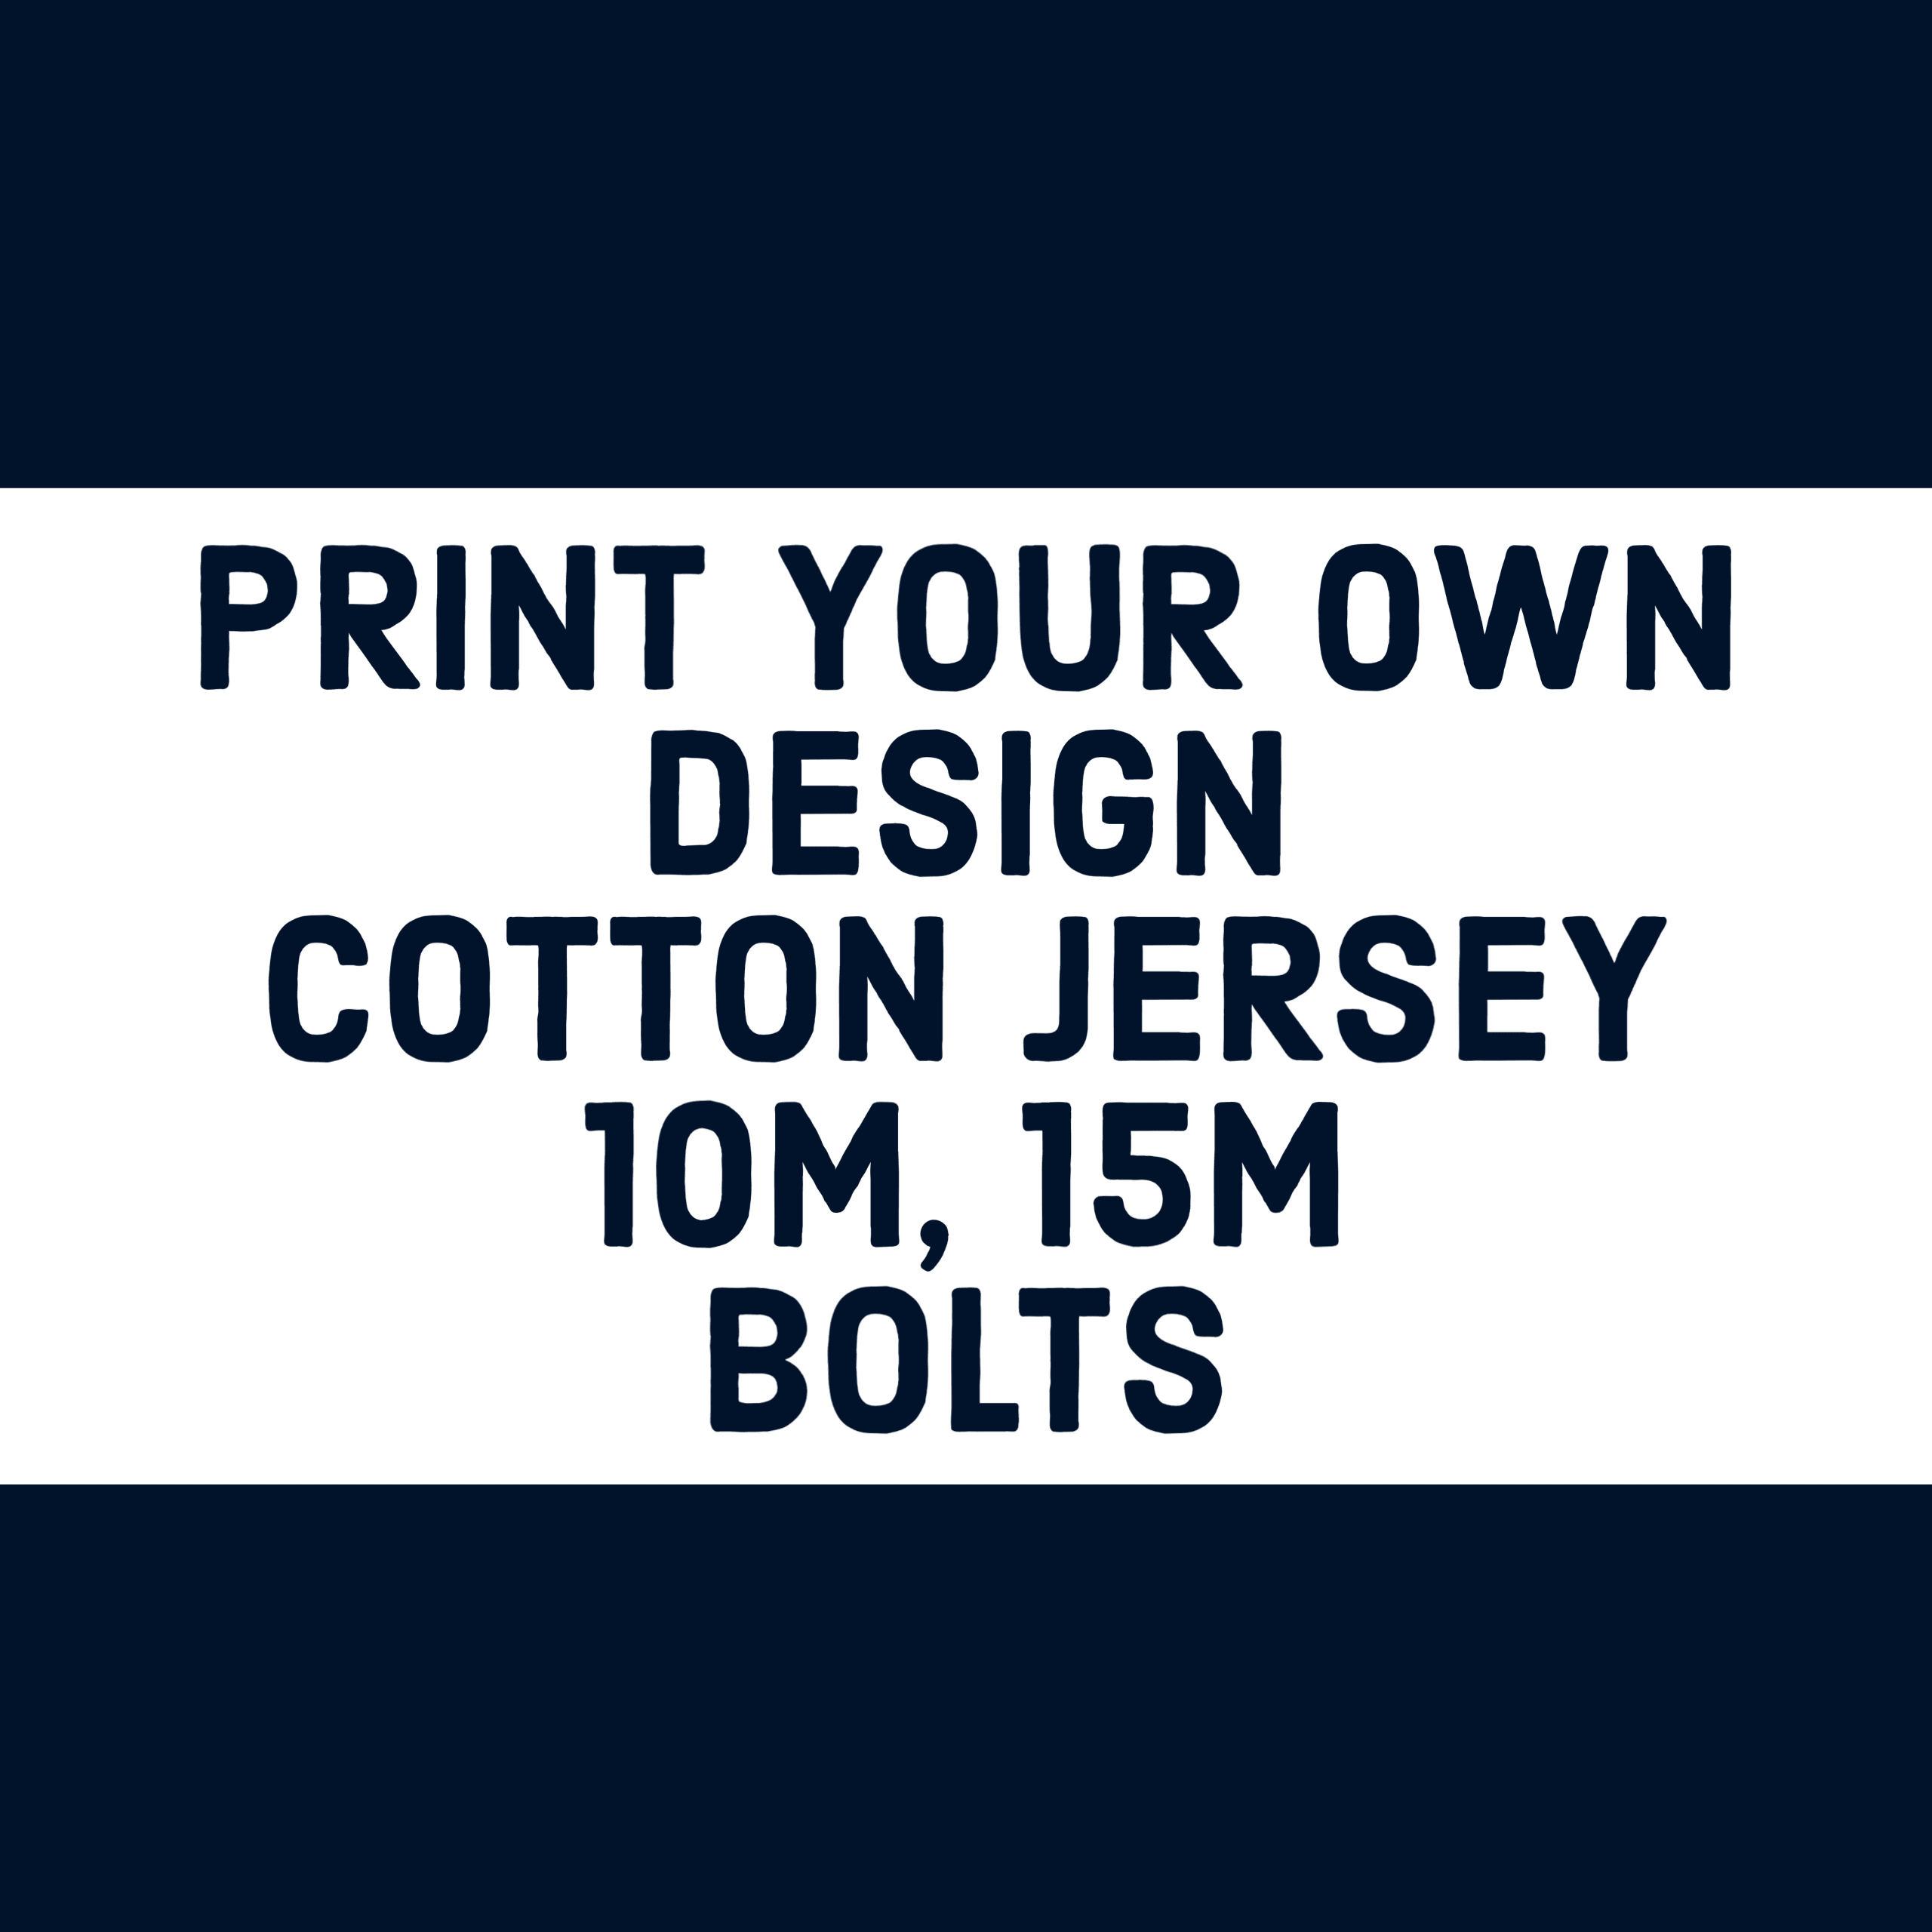 Print Your Own Design Cotton Jersey